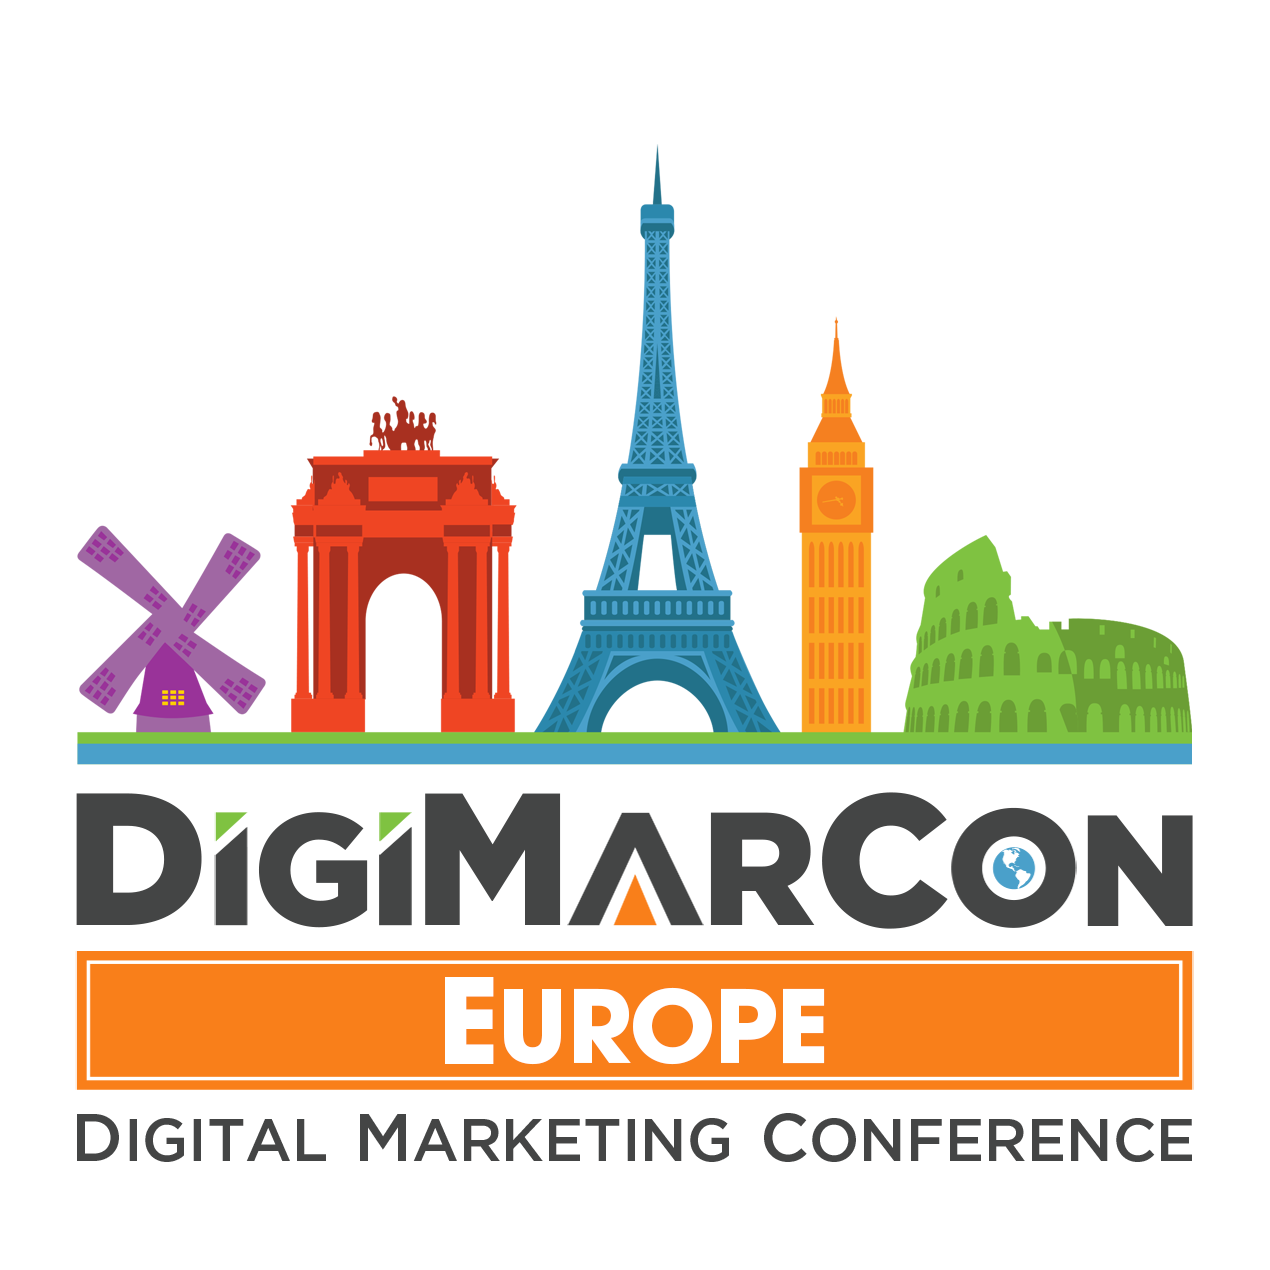 DigiMarCon Europe 2024 - Digital Marketing, Media and Advertising Conference & Exhibition